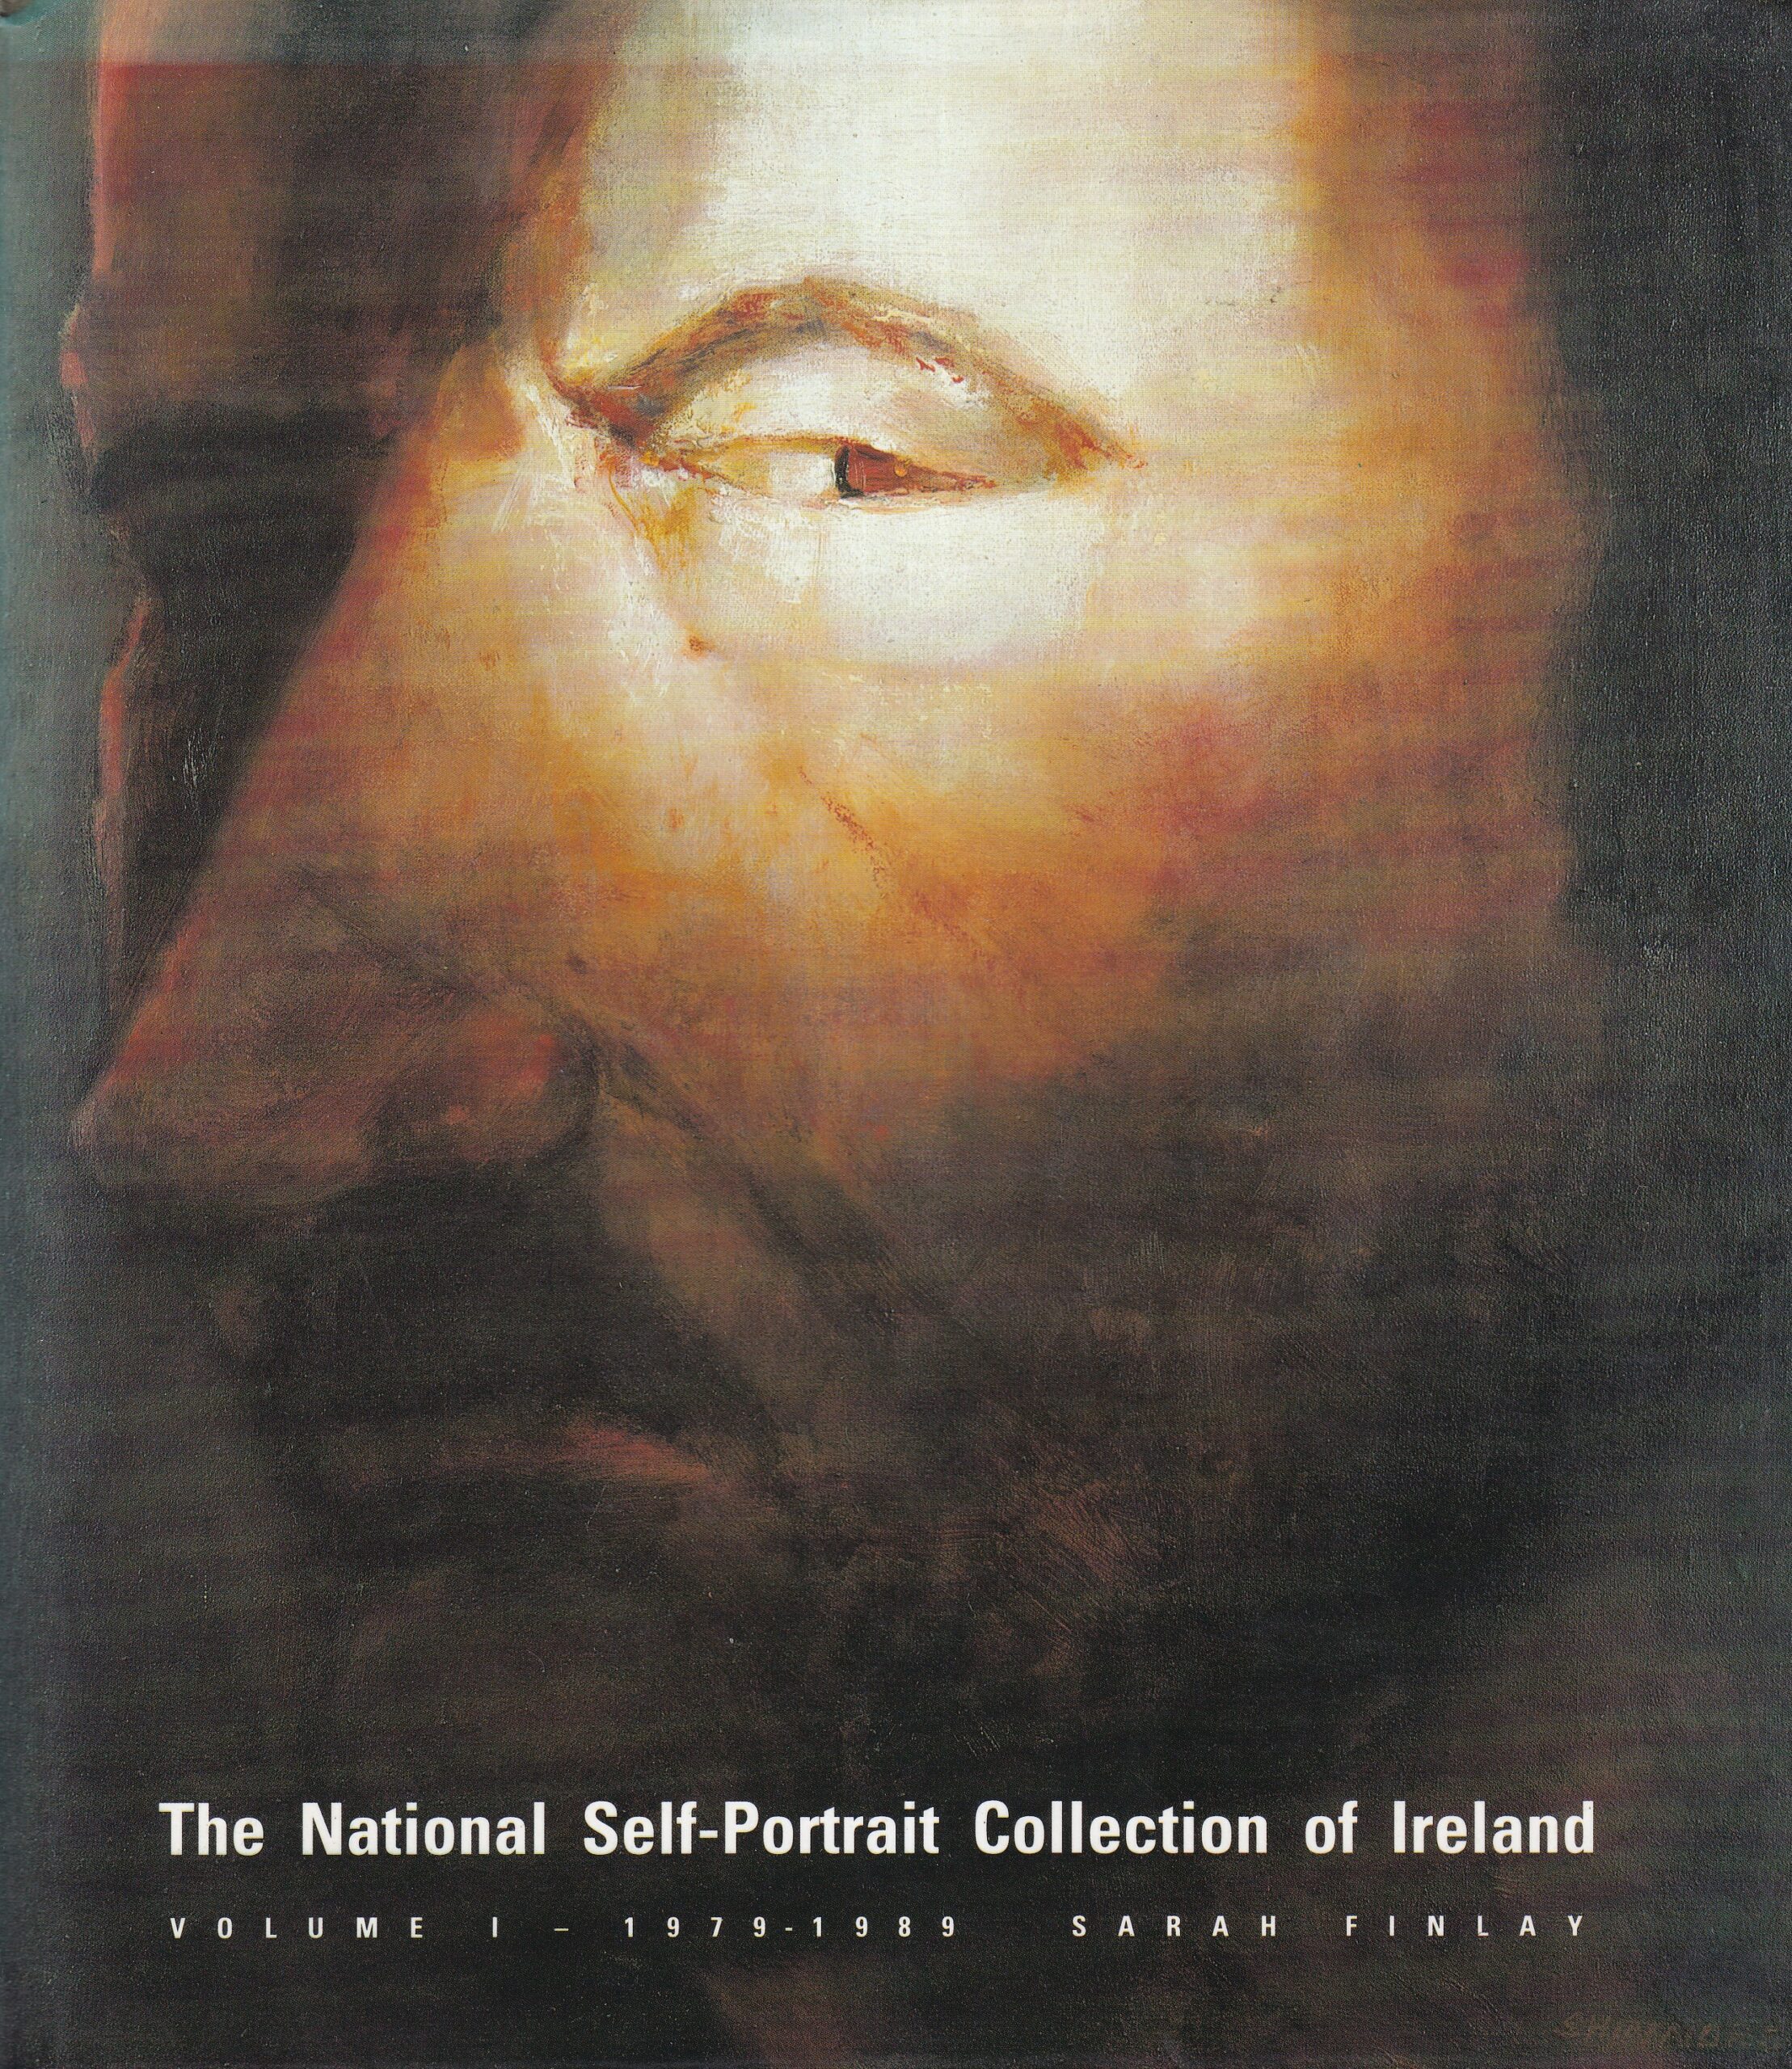 The National Self-Portrait Collection of Ireland Volume 1,1979-1989 by Sarah Finlay